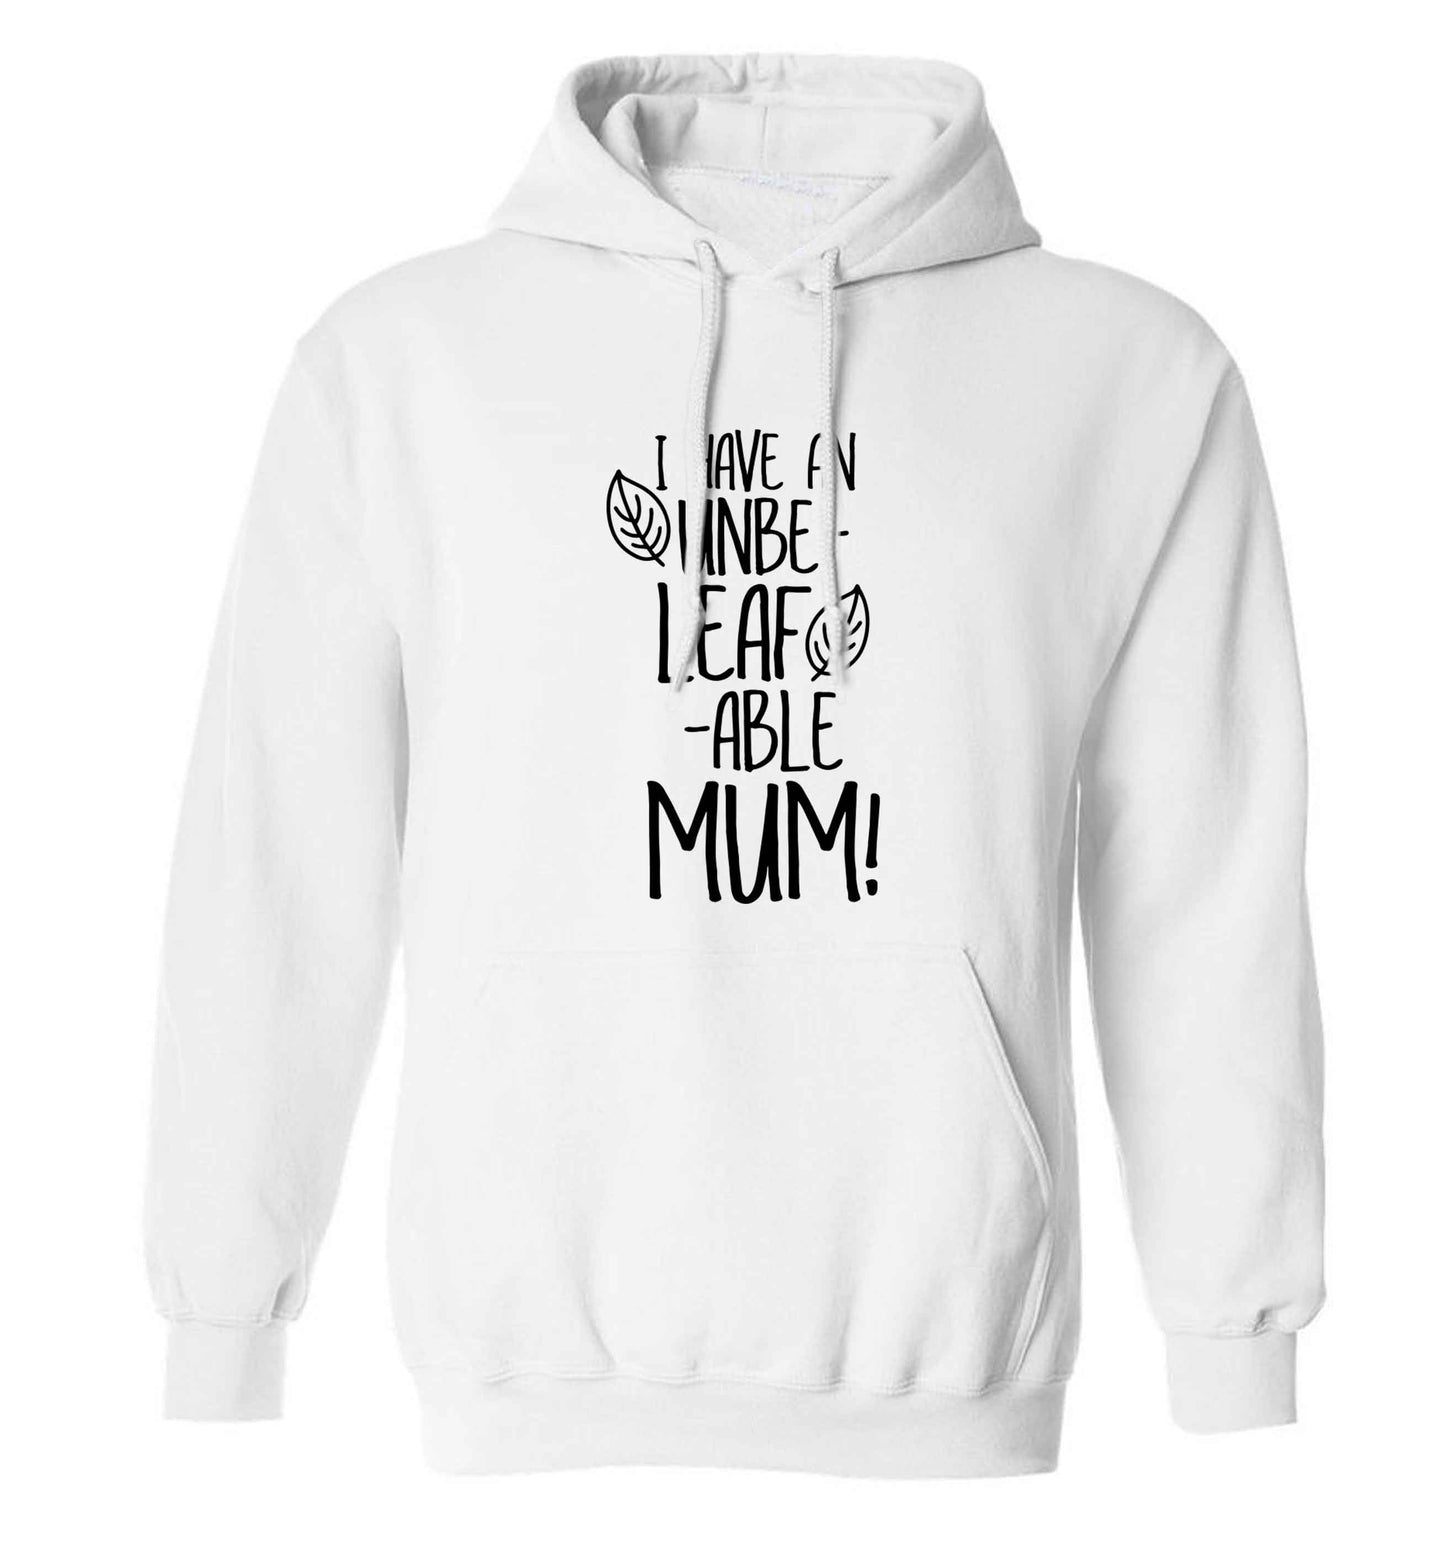 I have an unbeleafable mum! adults unisex white hoodie 2XL